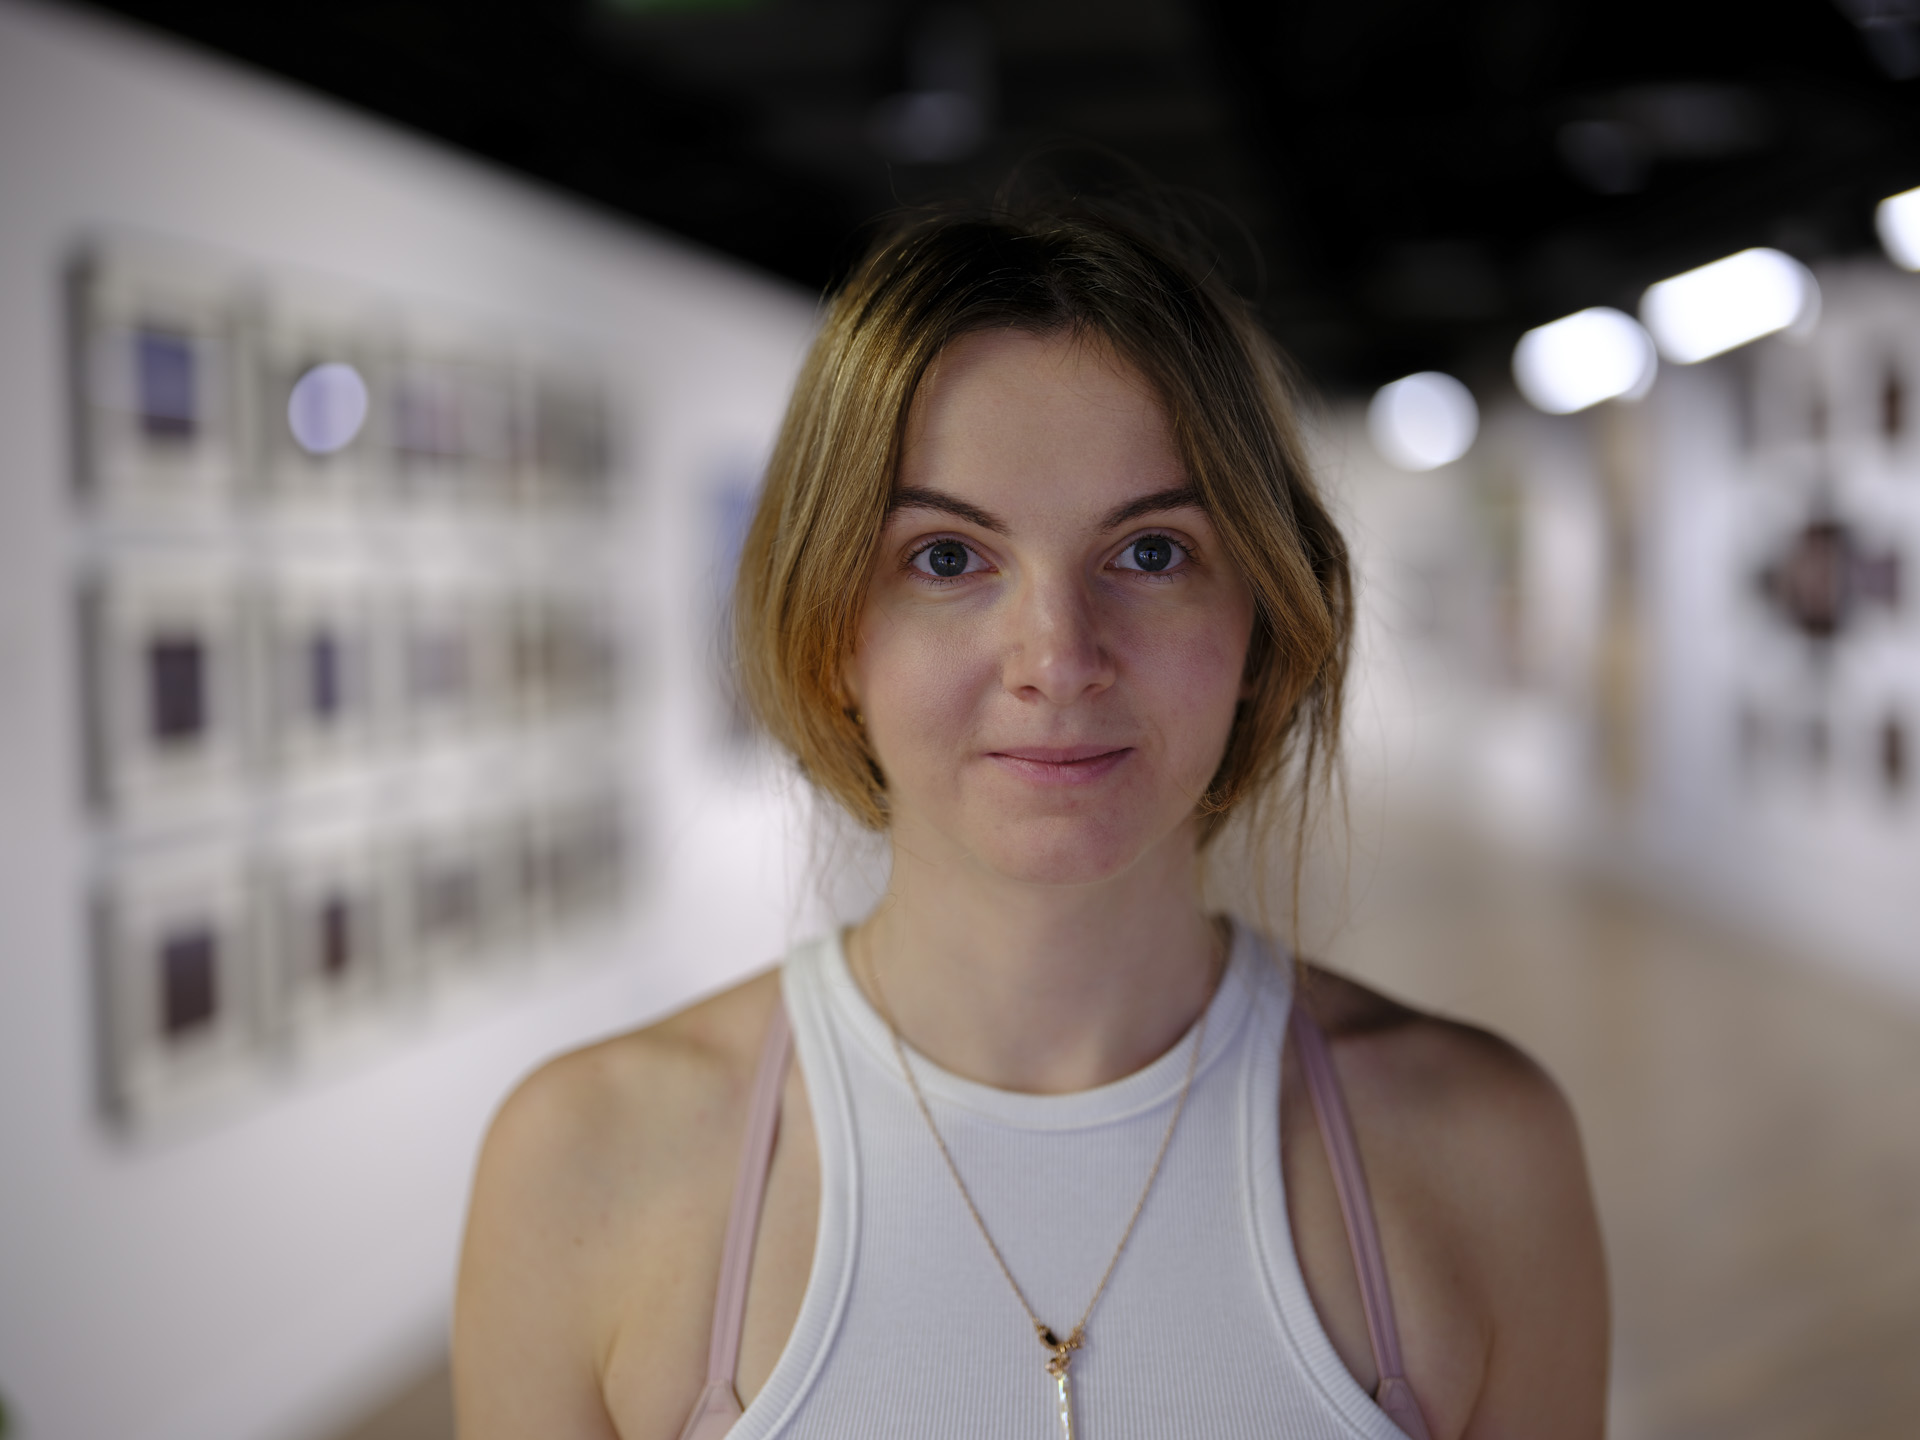 Portrait of a lady in an art gallery, photo using the Fujifilm GFX100 II and GF 55mm F1.7 lens